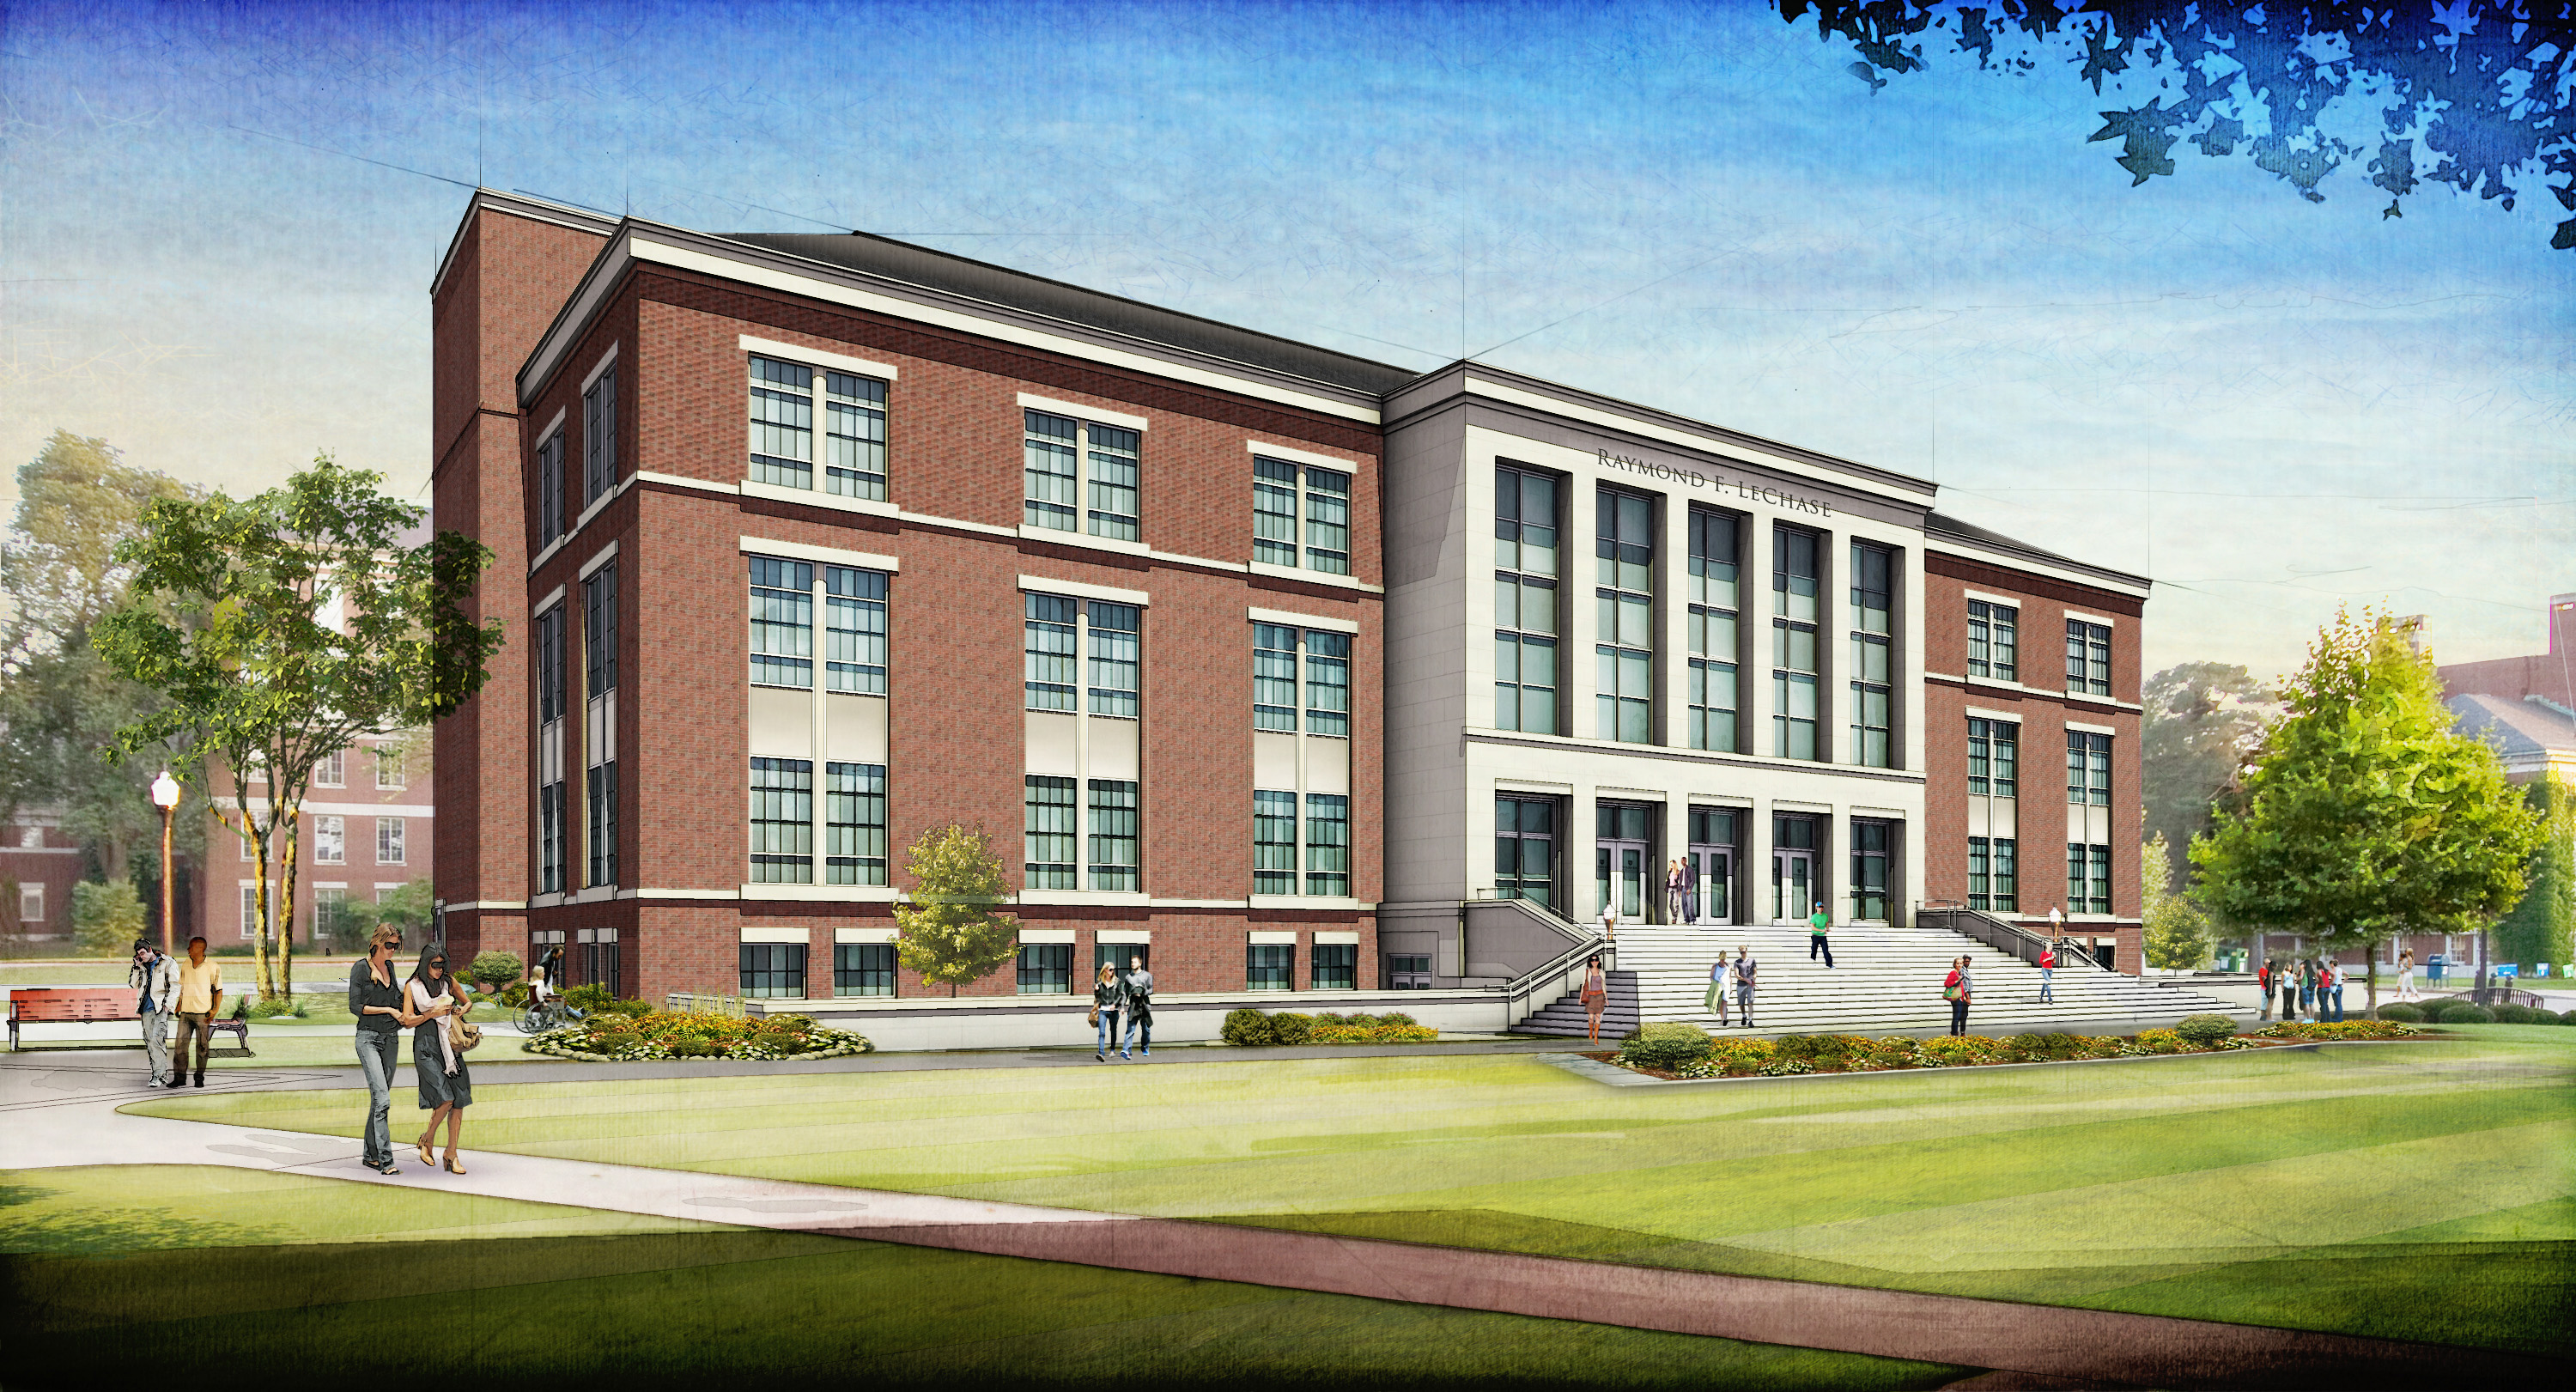 Warner School to expand into new building - Campus Times - Campus Times